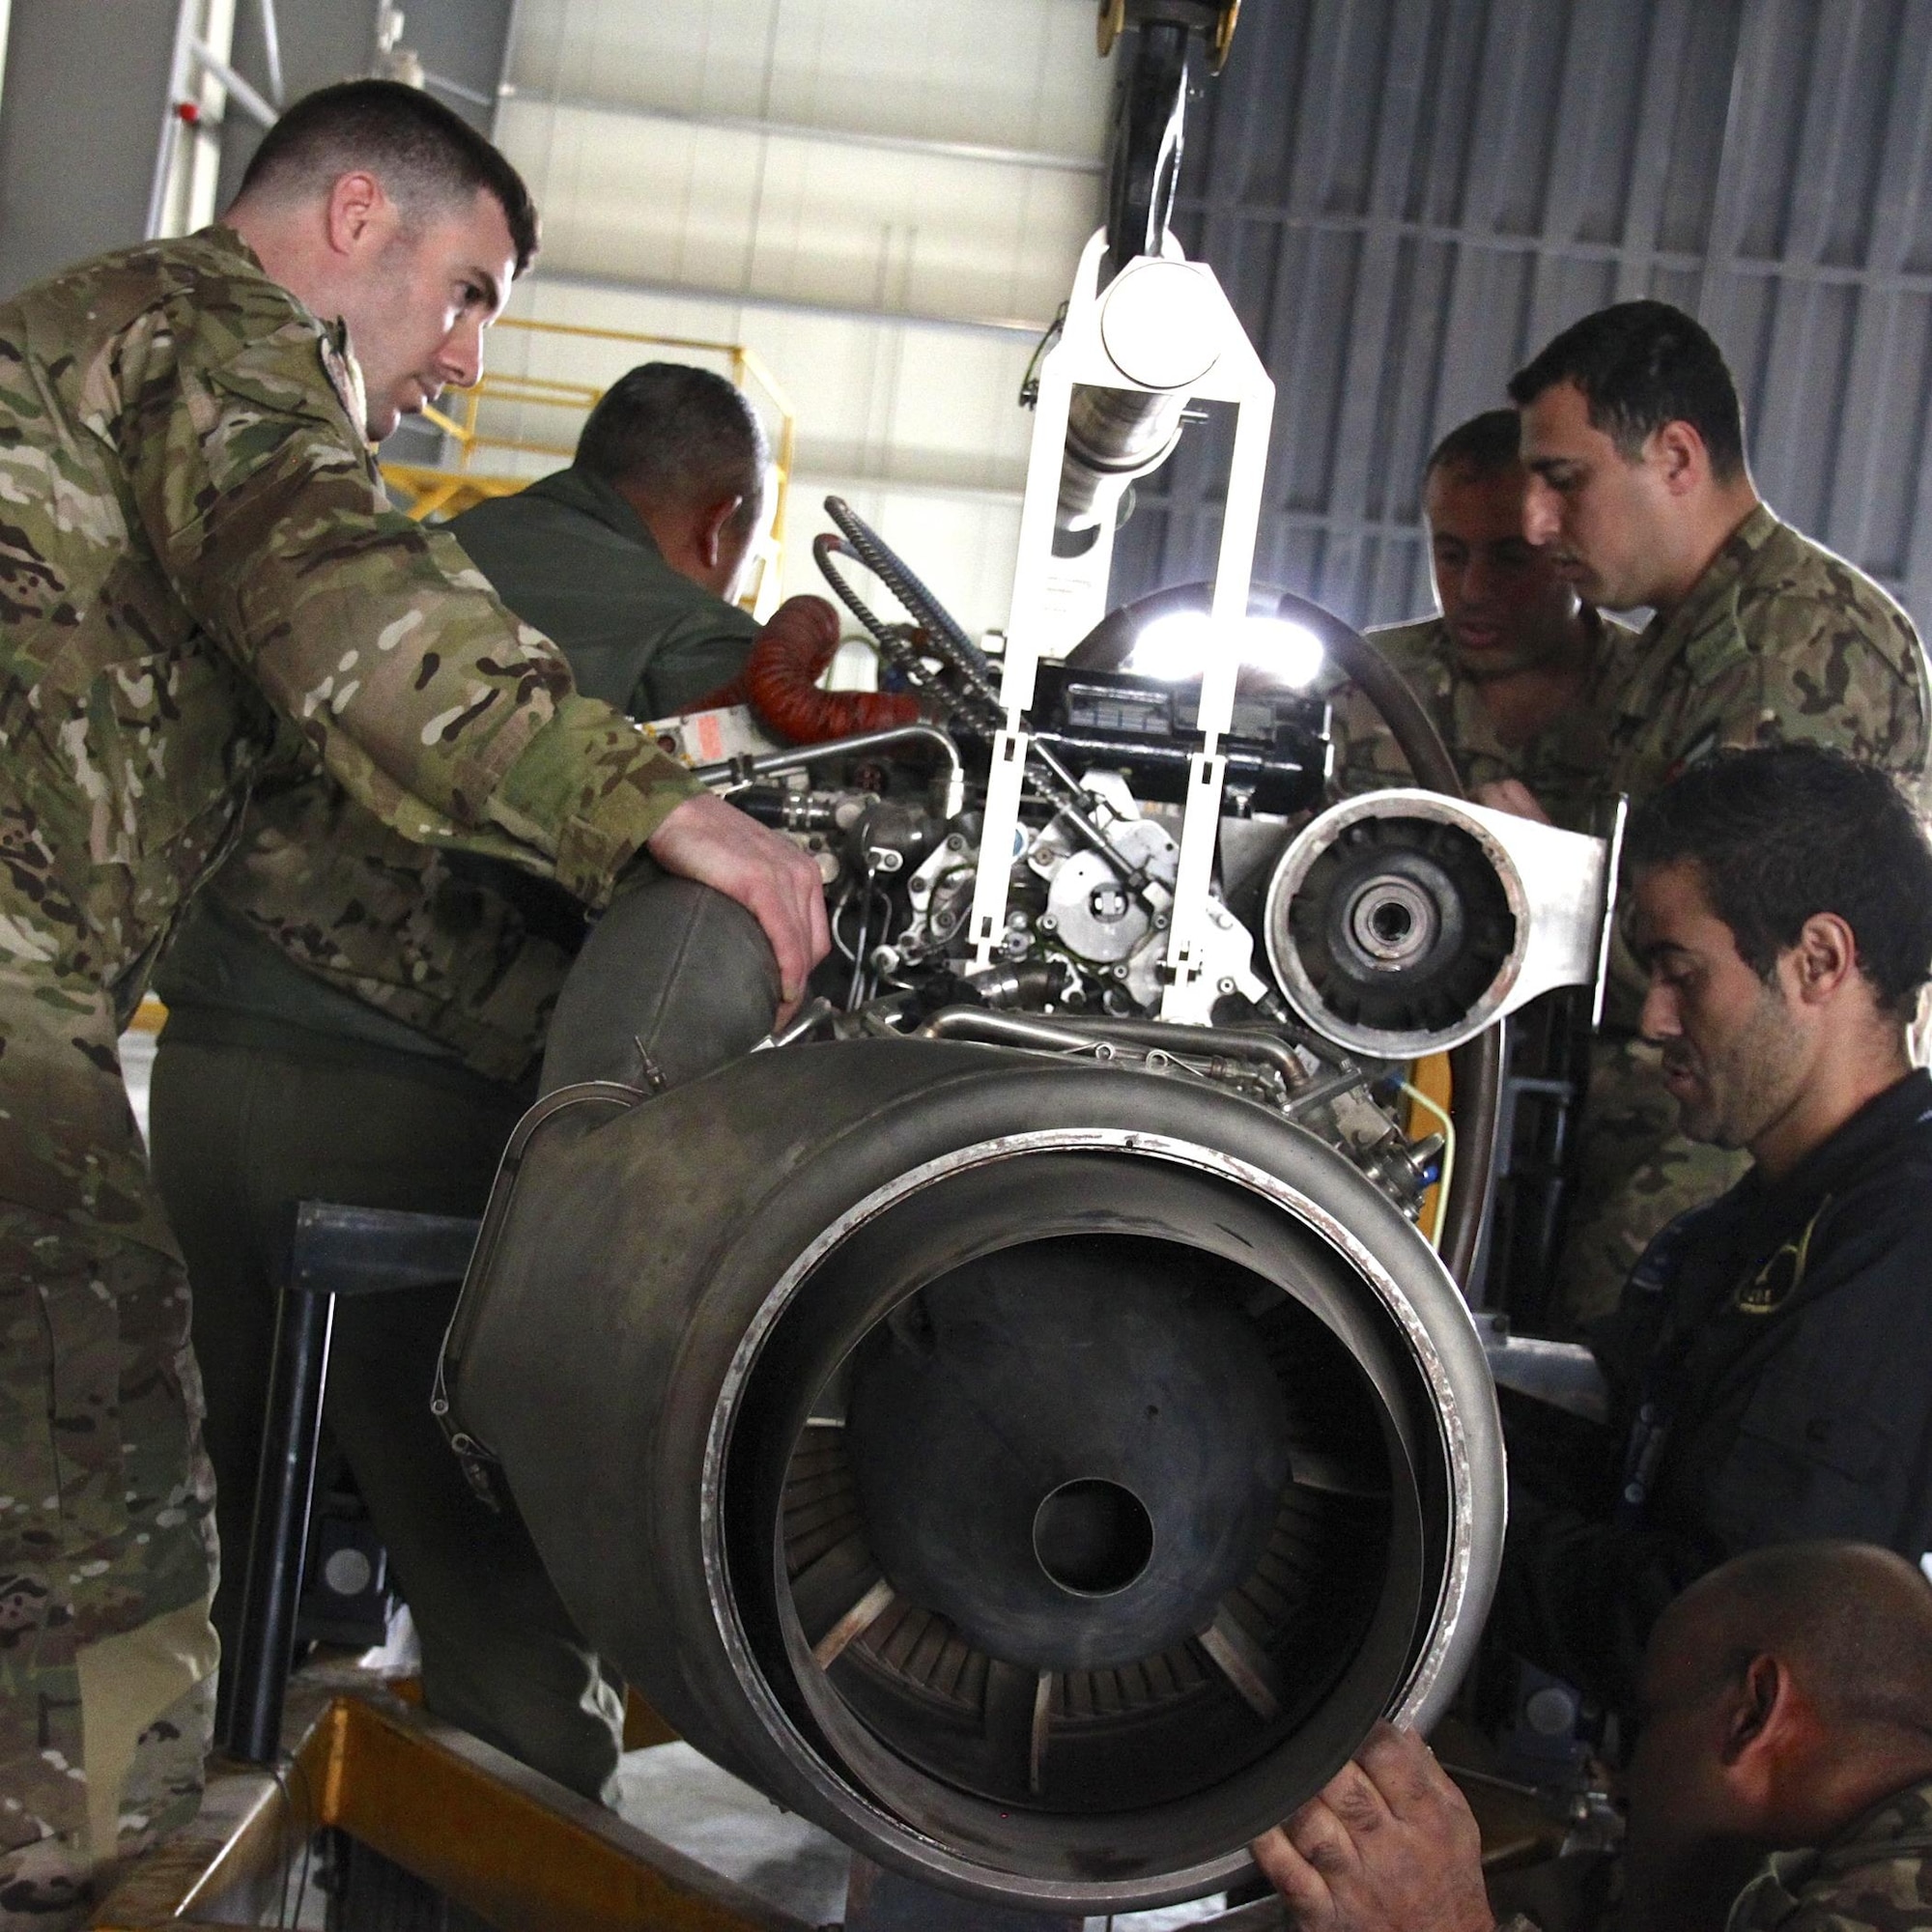 Combat Aviation Advisors help partner nation mechanics with aircraft engine maintenance during a deployed mission in March.  A CAA deployment sends a small team of Airmen to assess, advise, train, and assist friendly and allied forces with their own airpower resources.  Duke Field is the home of the only two CAA squadrons in the Air Force, the active-duty 6th Special Operations Squadron and the Reserve 711th SOS.  (Courtesy photo)